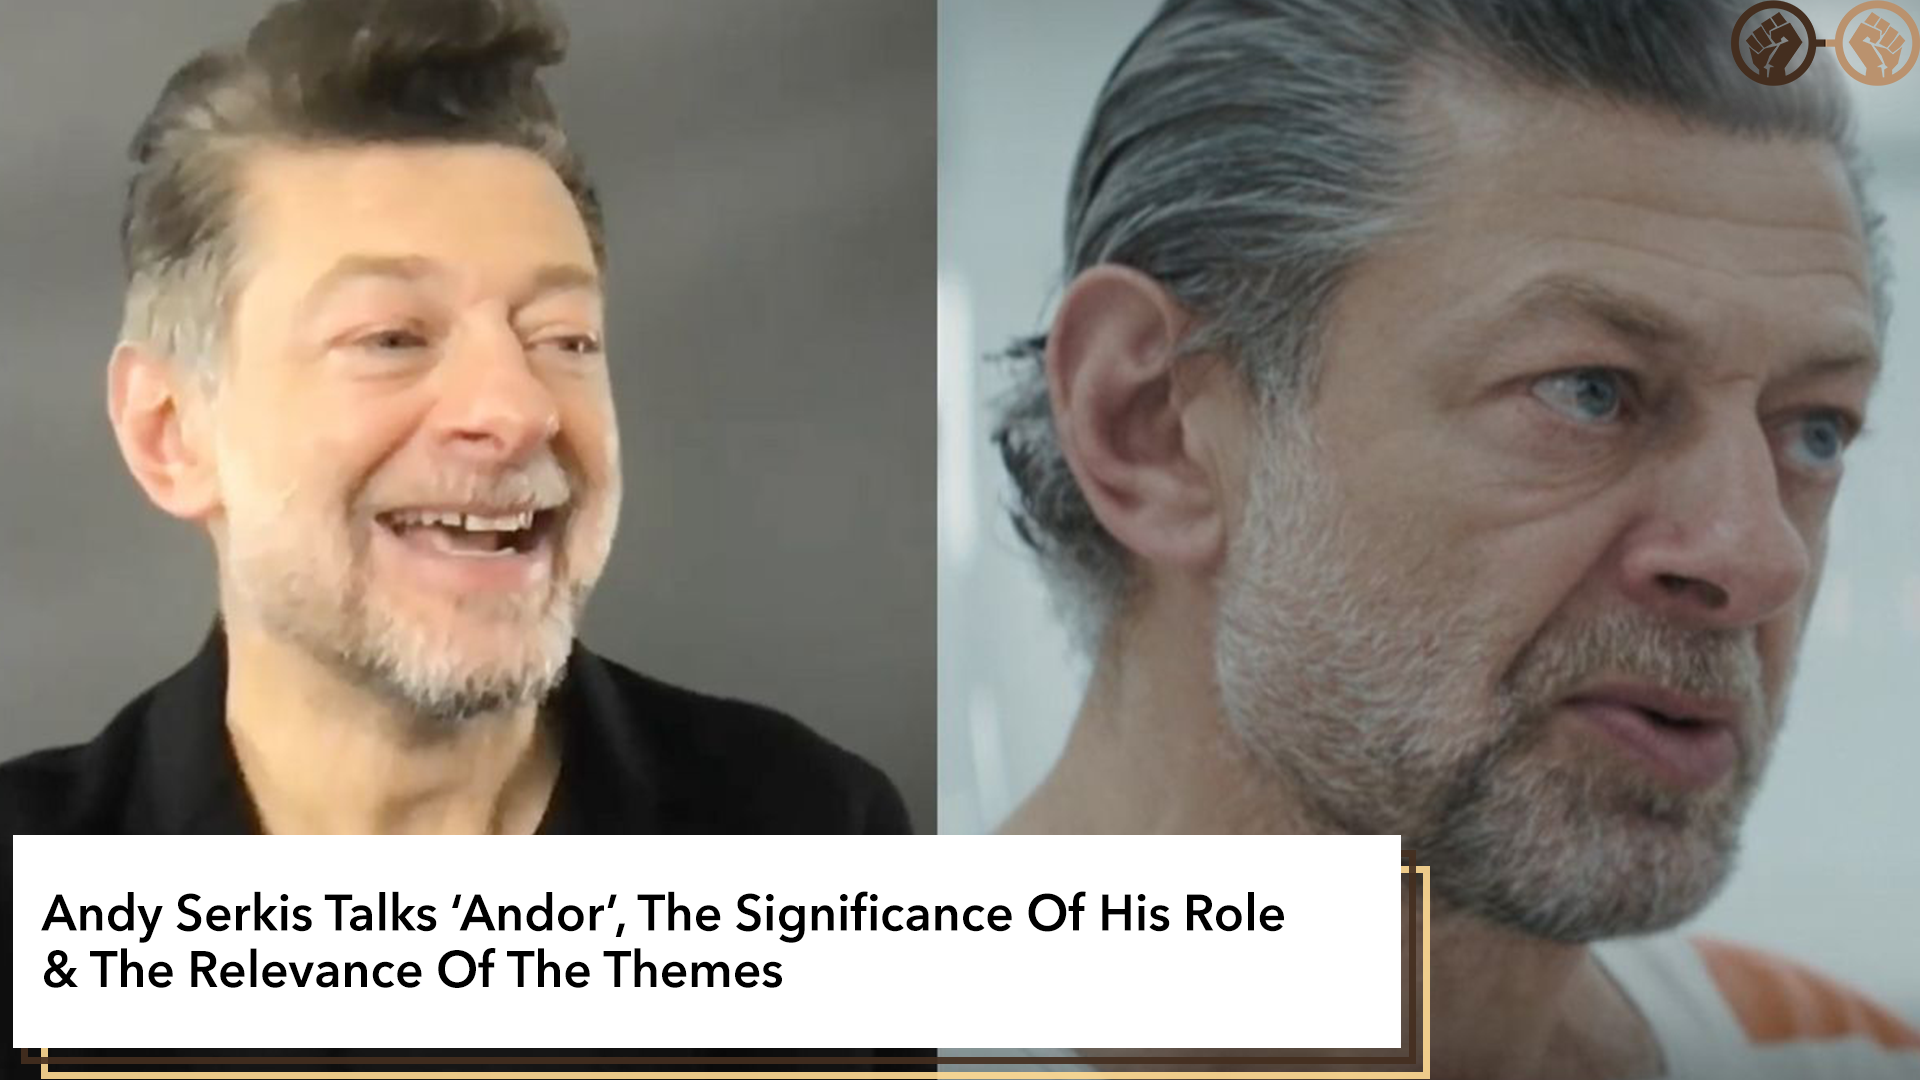 Interview: Andy Serkis Talks ‘Andor’, The Significance Of His Role & The Relevance Of The Themes